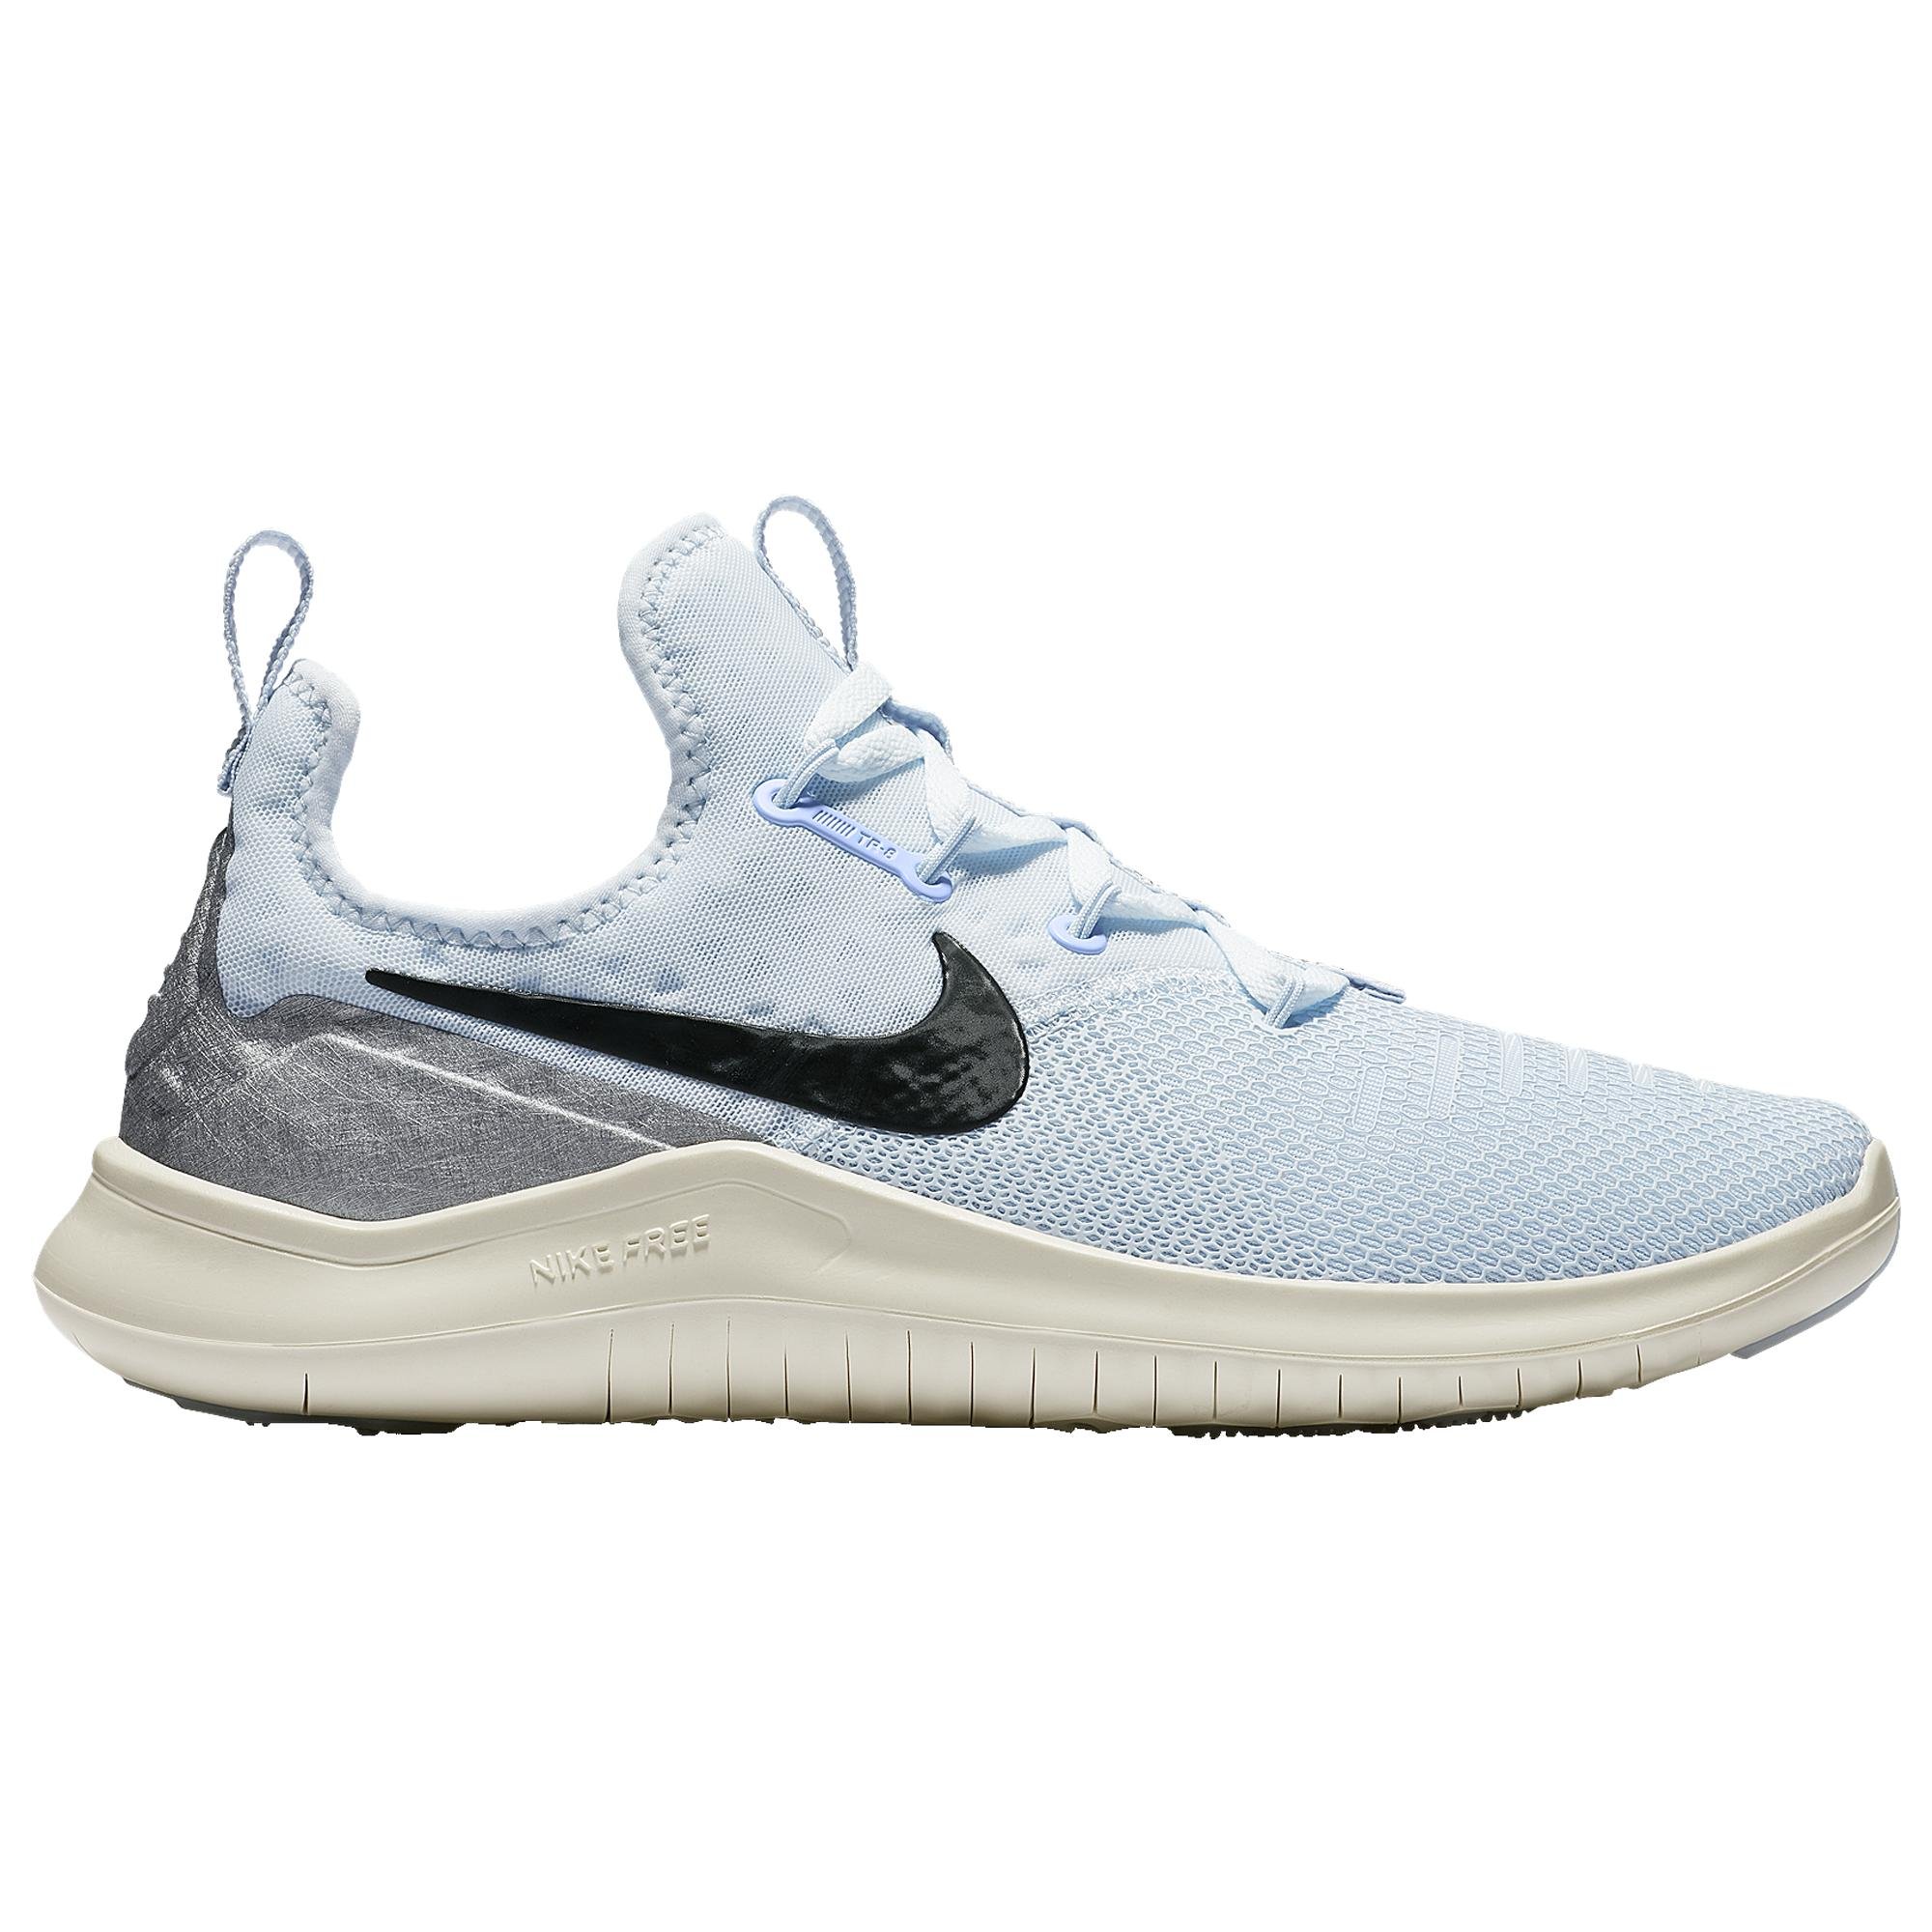 Nike Free Tr 8 Training Shoes in Blue/Black/Silver (Blue) - Lyst